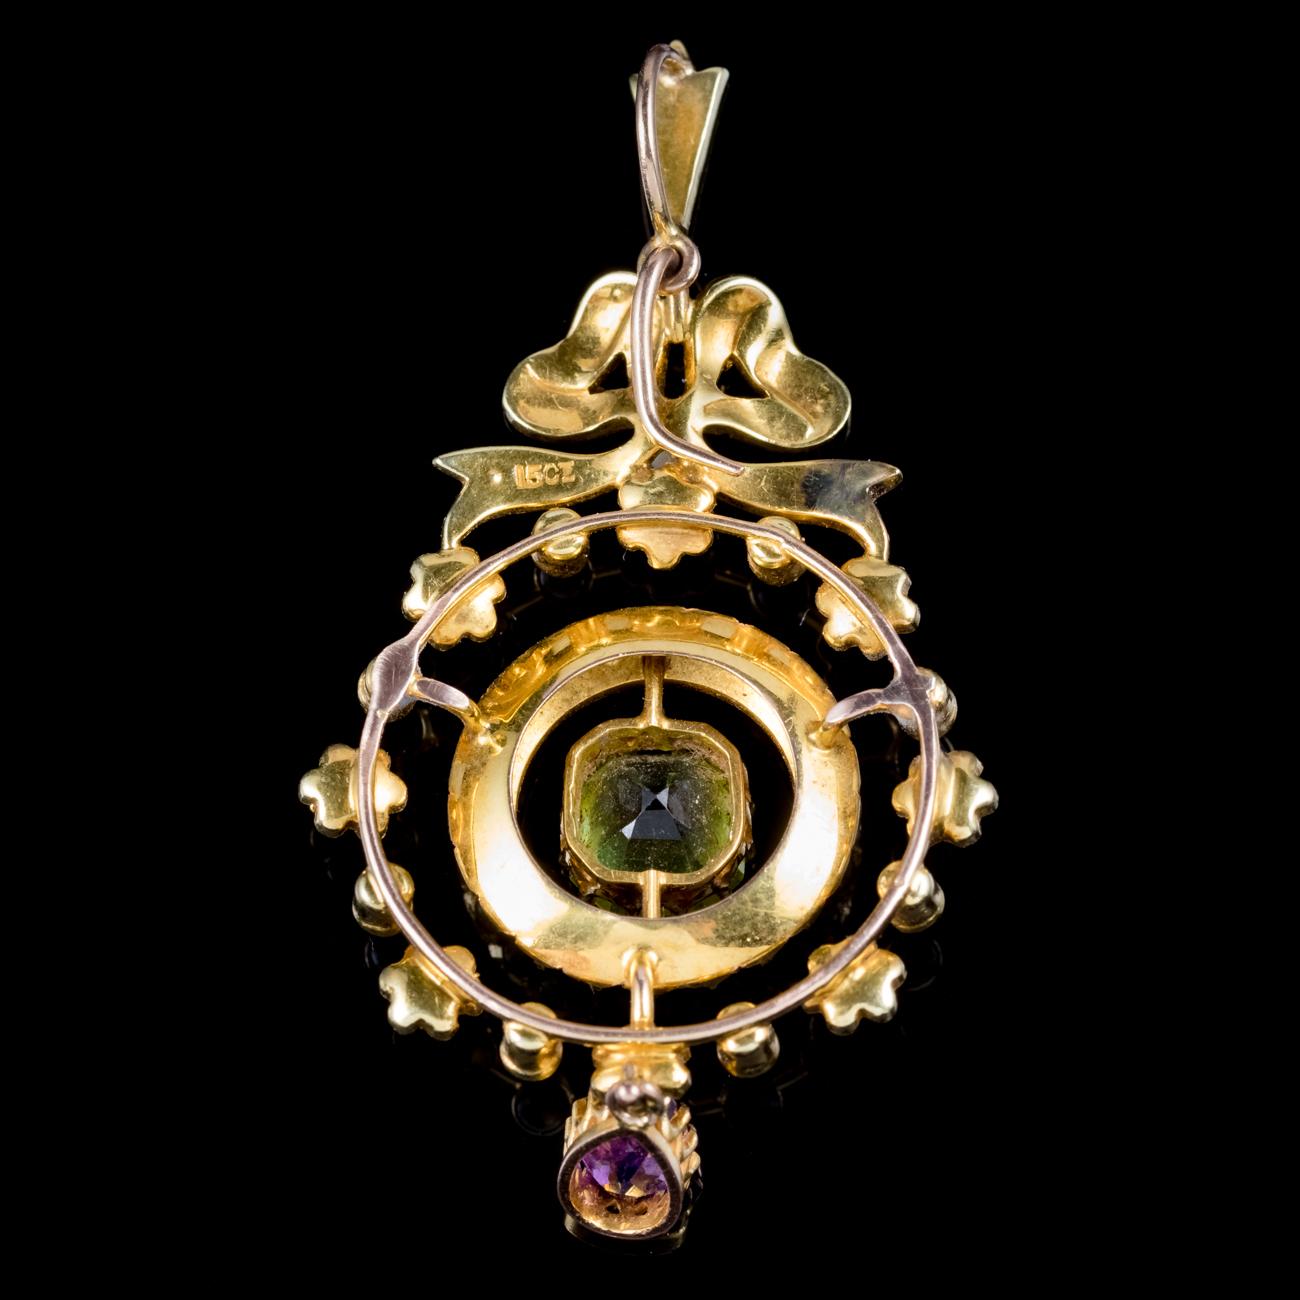 A pretty antique Edwardian Suffragette pendant modelled in 15ct Yellow Gold with a border of flowers and a bow crowned on top. Decorated with lovely lustrous Pearls, a teardrop Amethyst dropper and a square cut Peridot in the centre. Suffragette